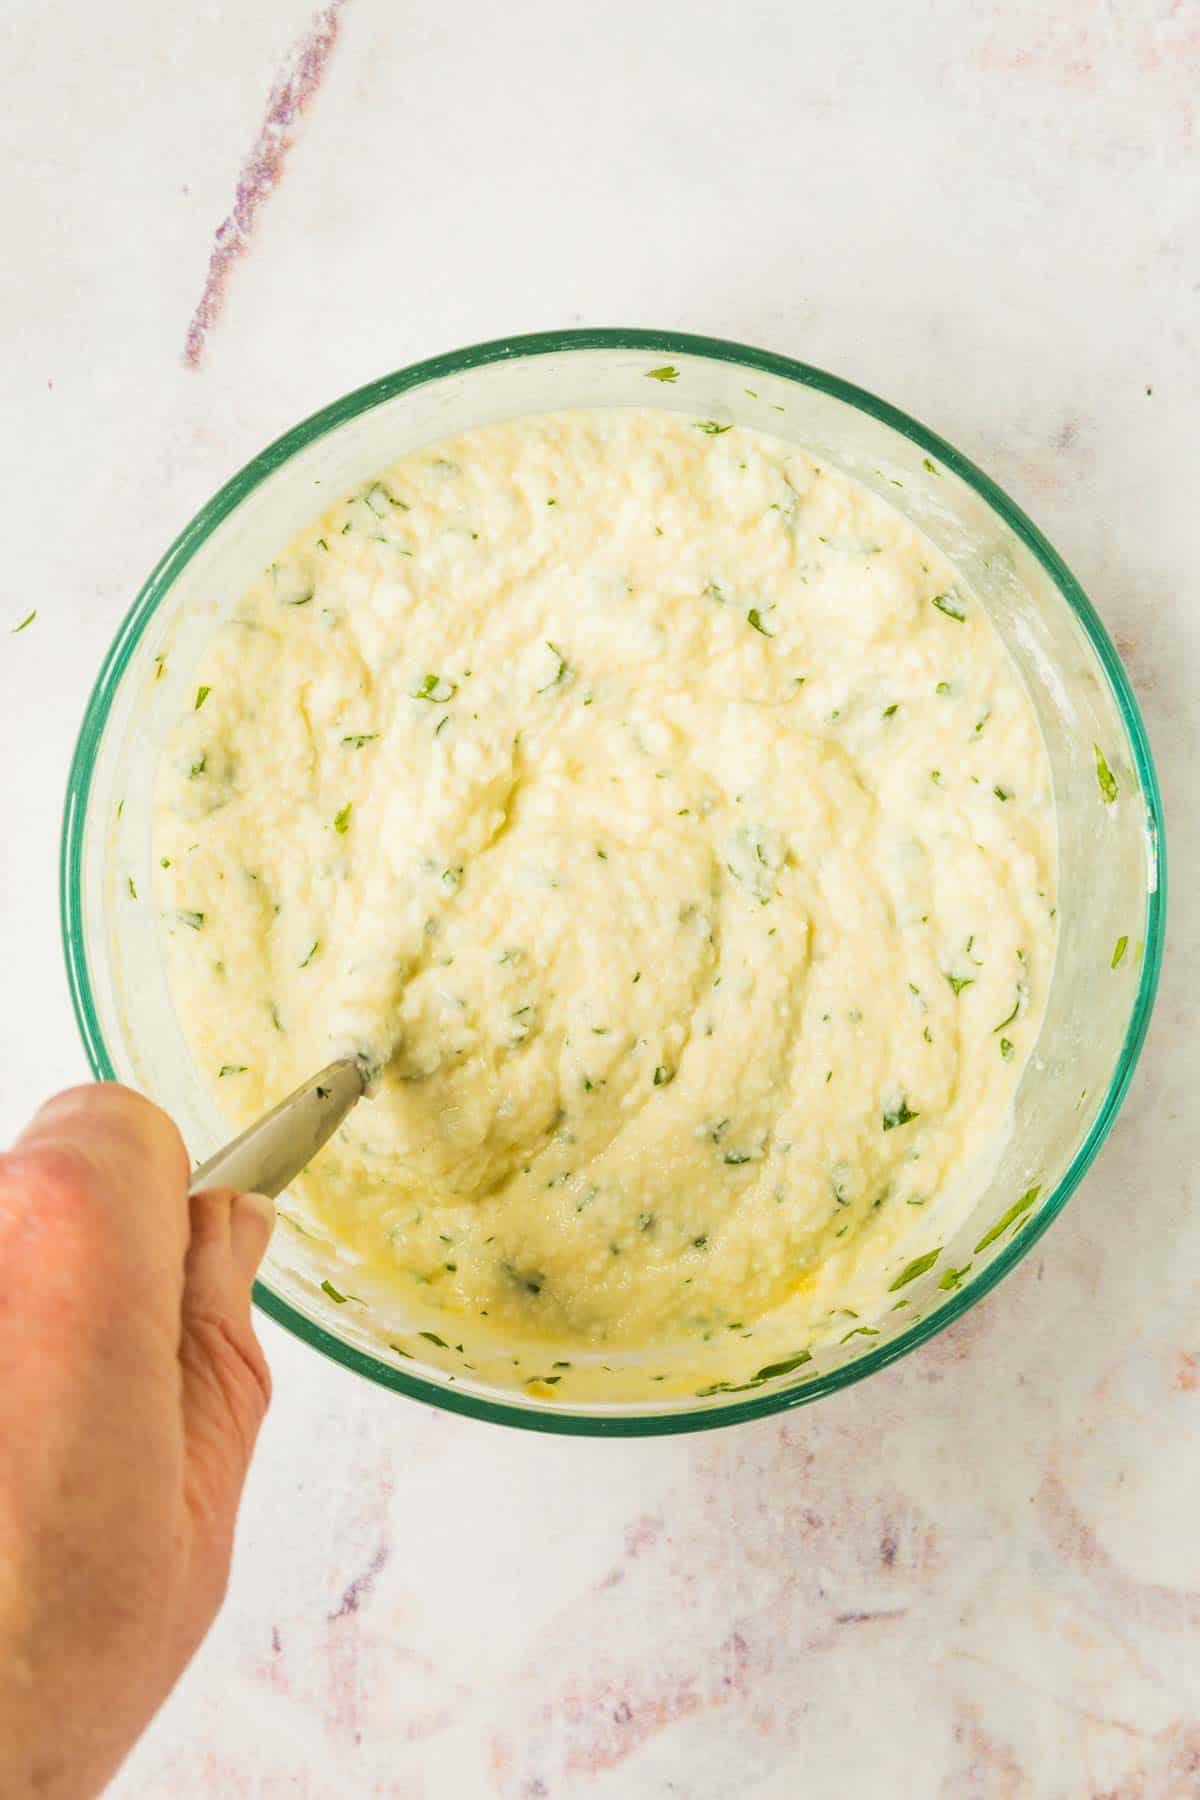 The combined ricotta cheese and egg mixture in a glass bowl.